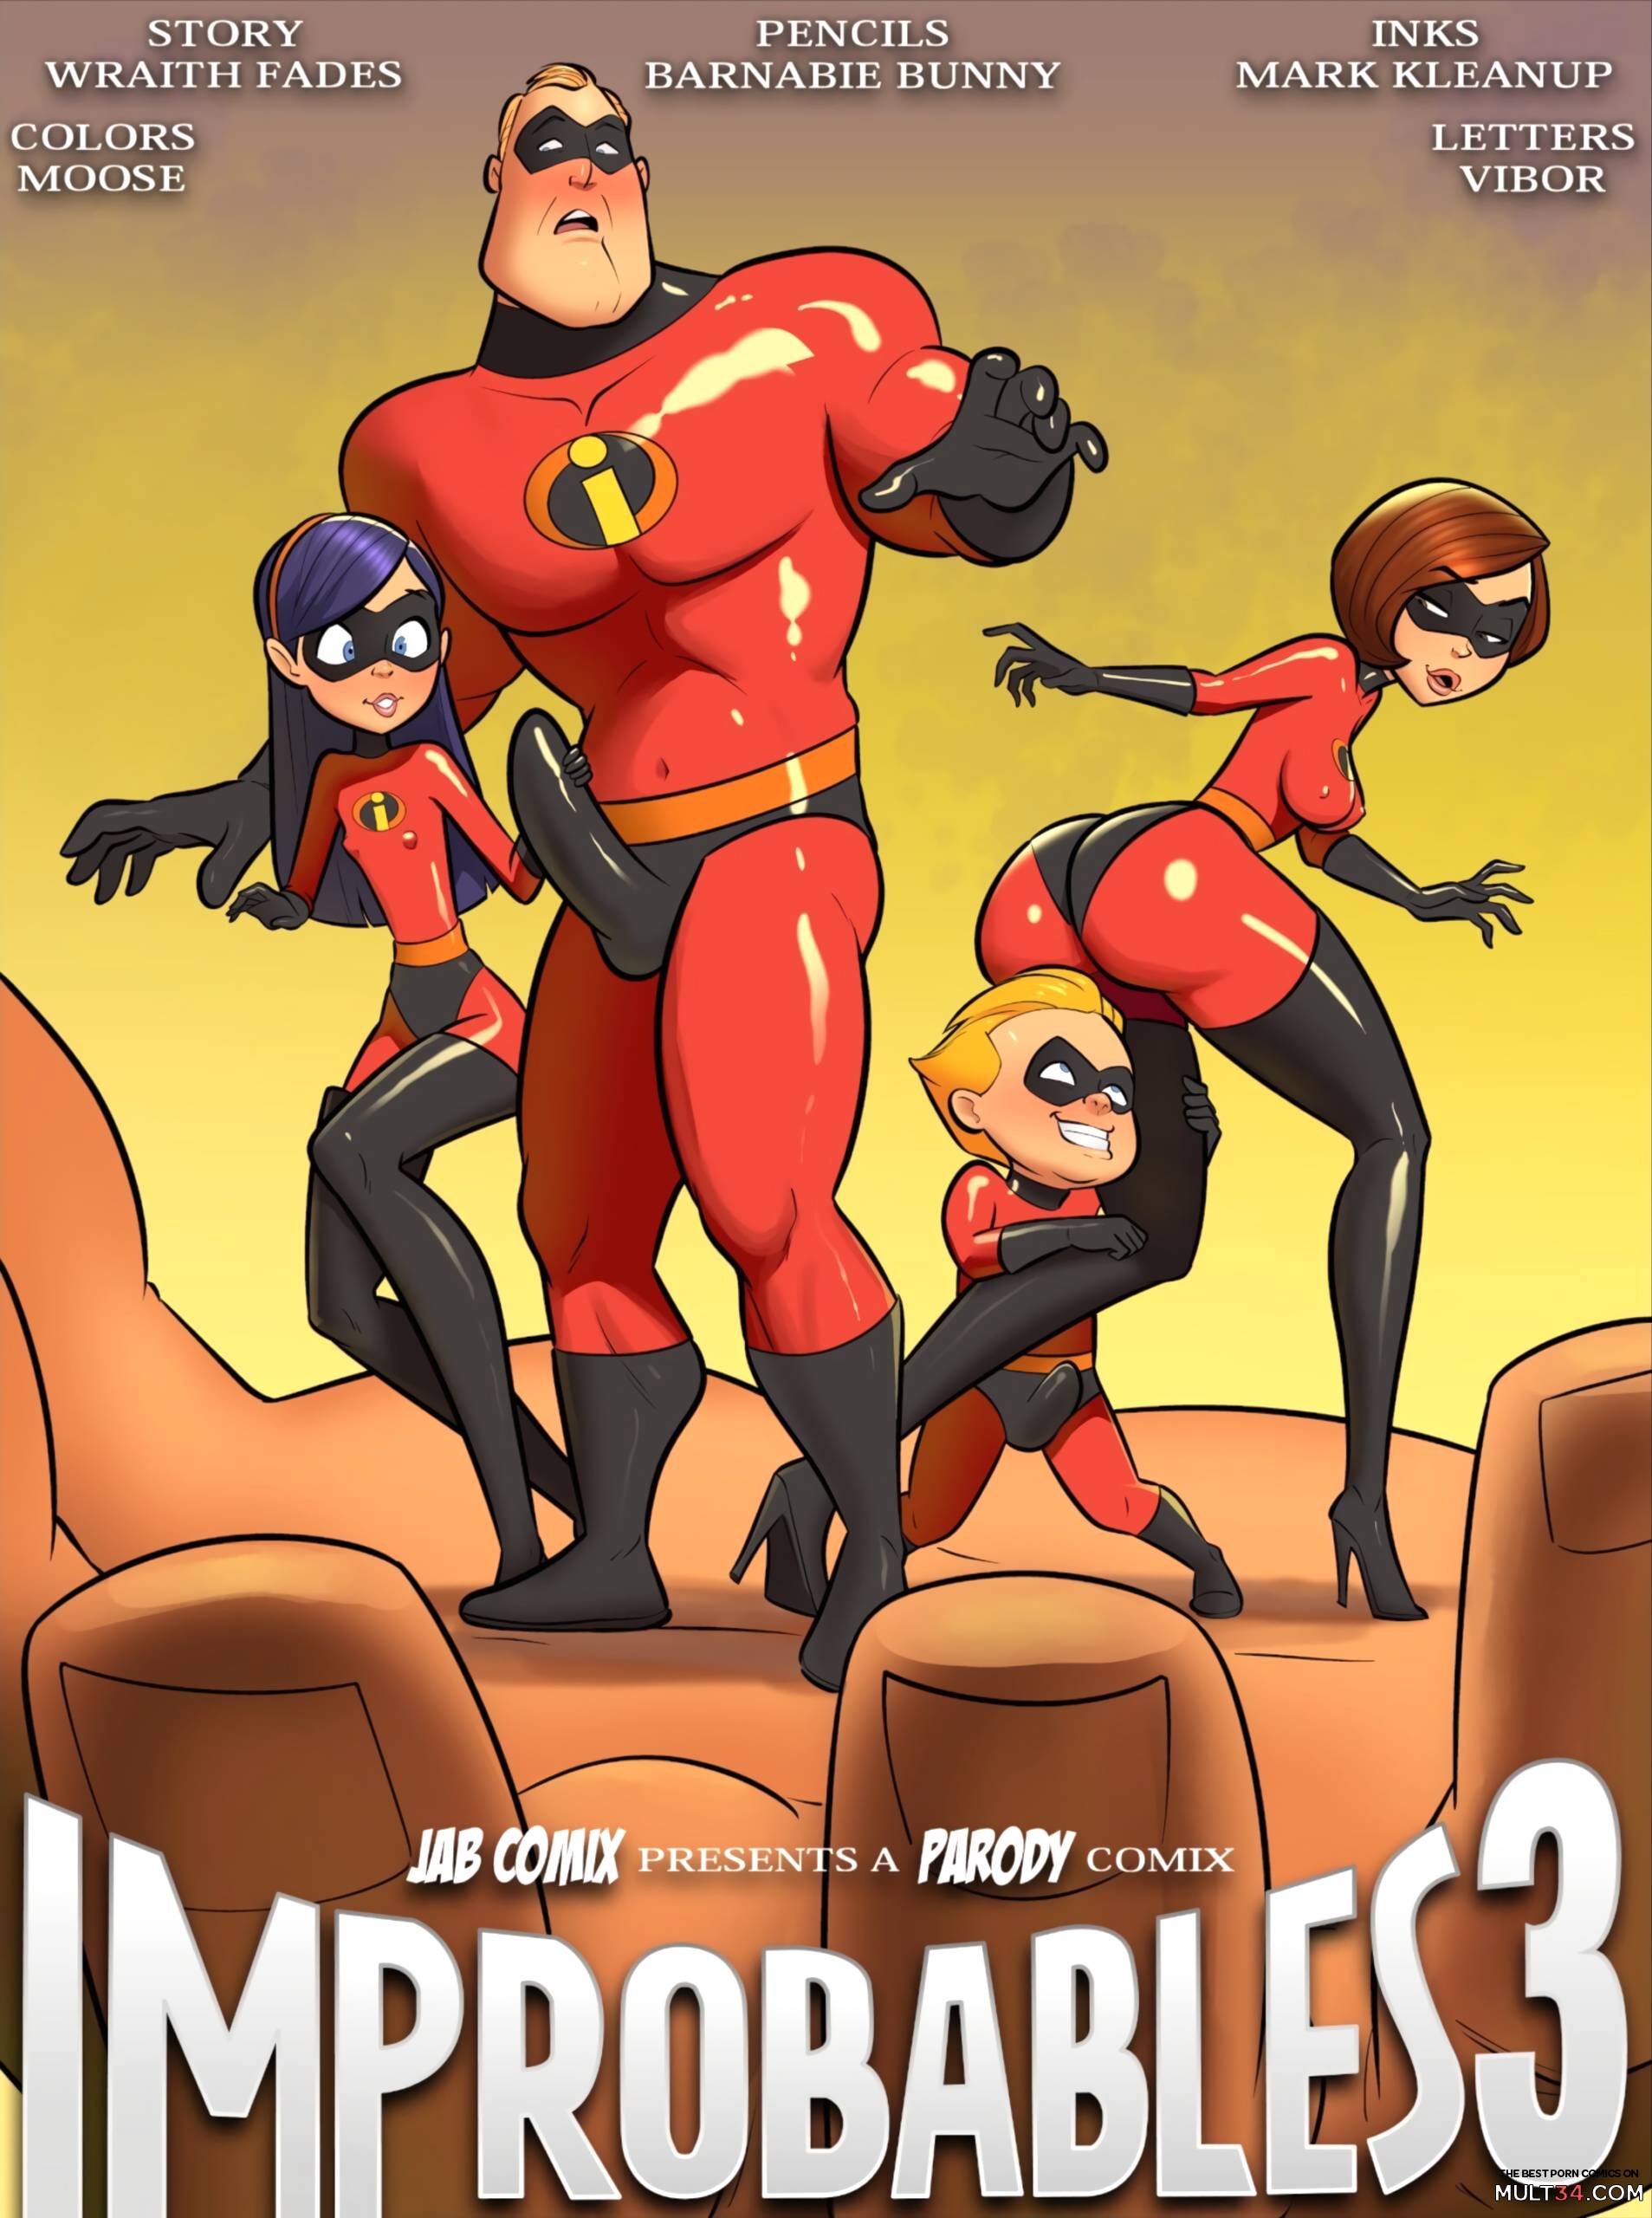 The Incredibles Porn Comic Strips - The Improbables 3 porn comic - the best cartoon porn comics, Rule 34 |  MULT34